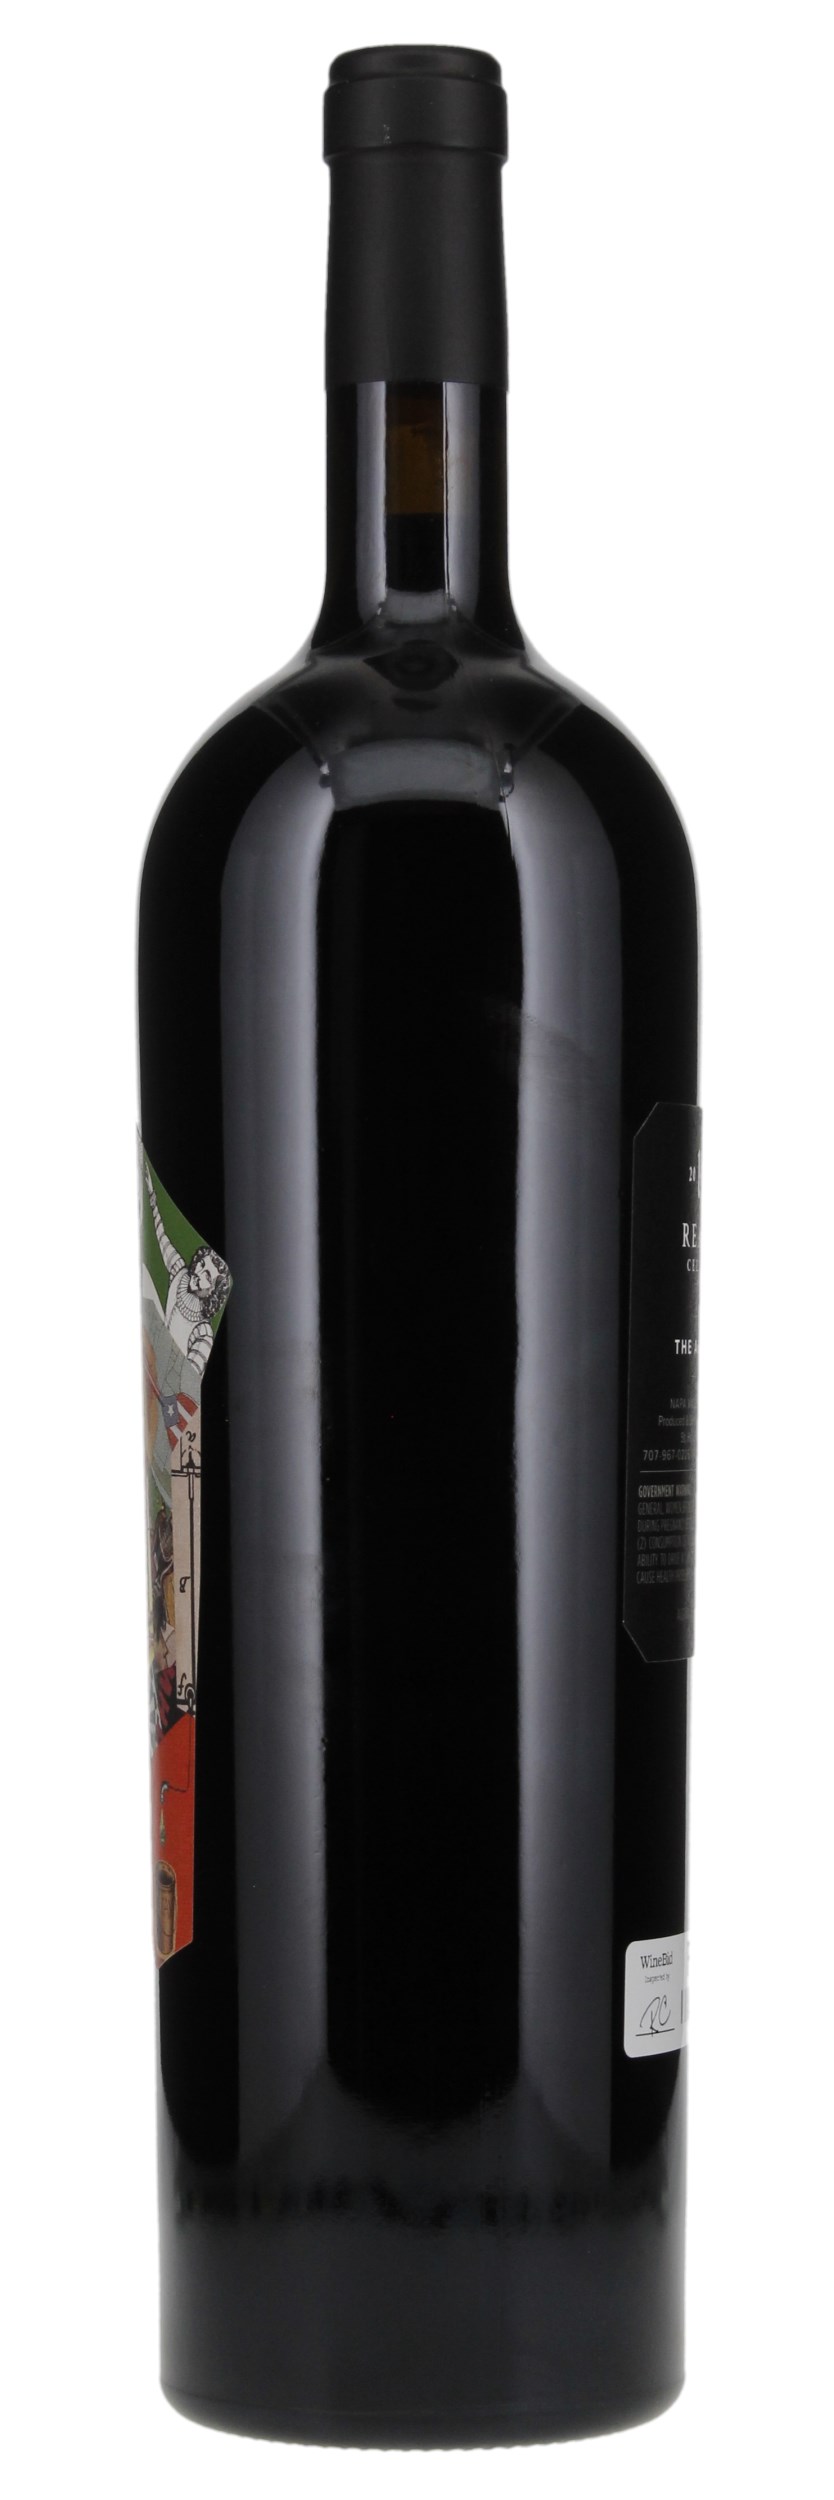 2013 Realm The Absurd, 1.5ltr